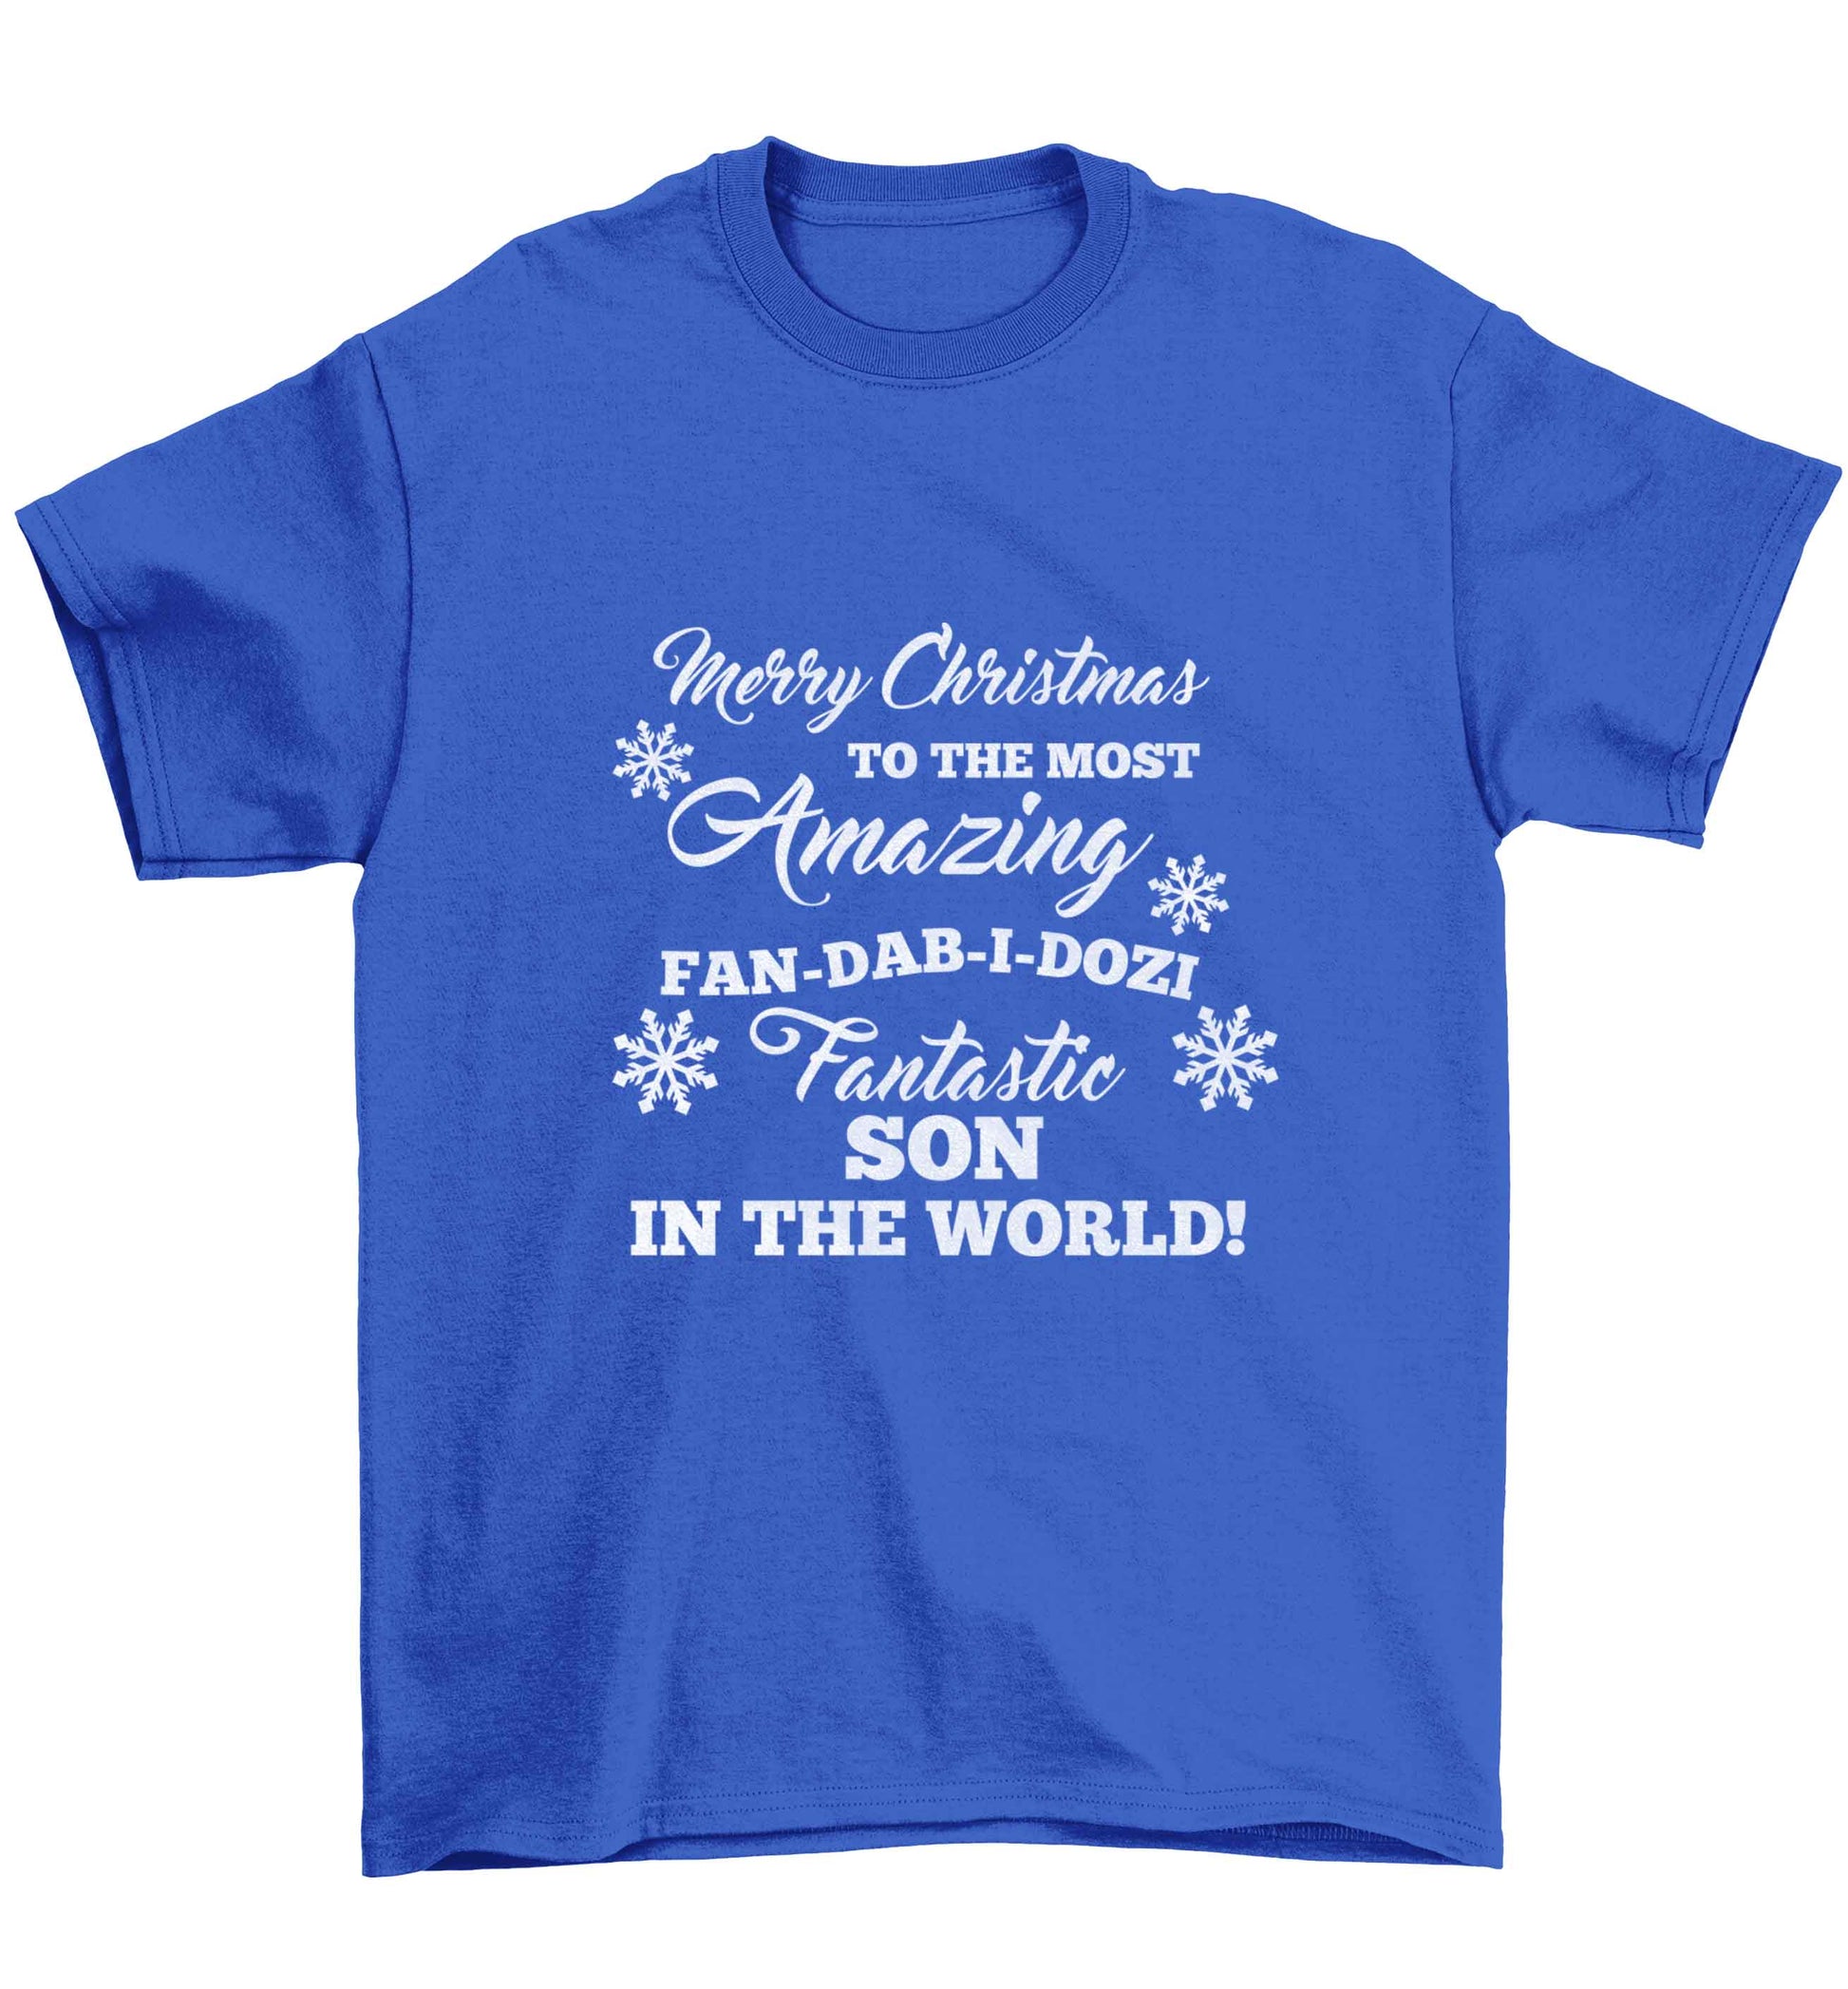 Merry Christmas to the most amazing fan-dab-i-dozi fantasic Son in the world Children's blue Tshirt 12-13 Years